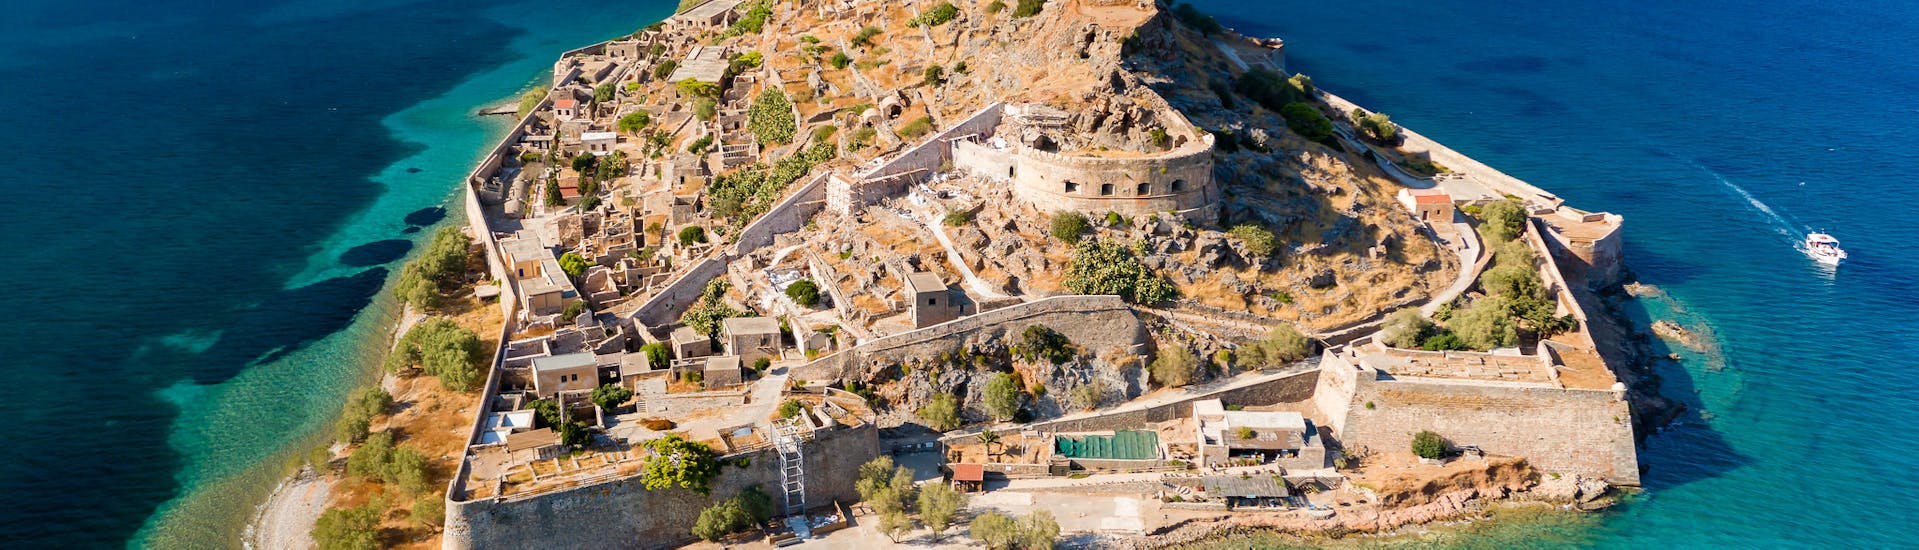 View from the sky of Spinalonga that you can visit during one of the trips provided by Indigo Cruises Elounda.